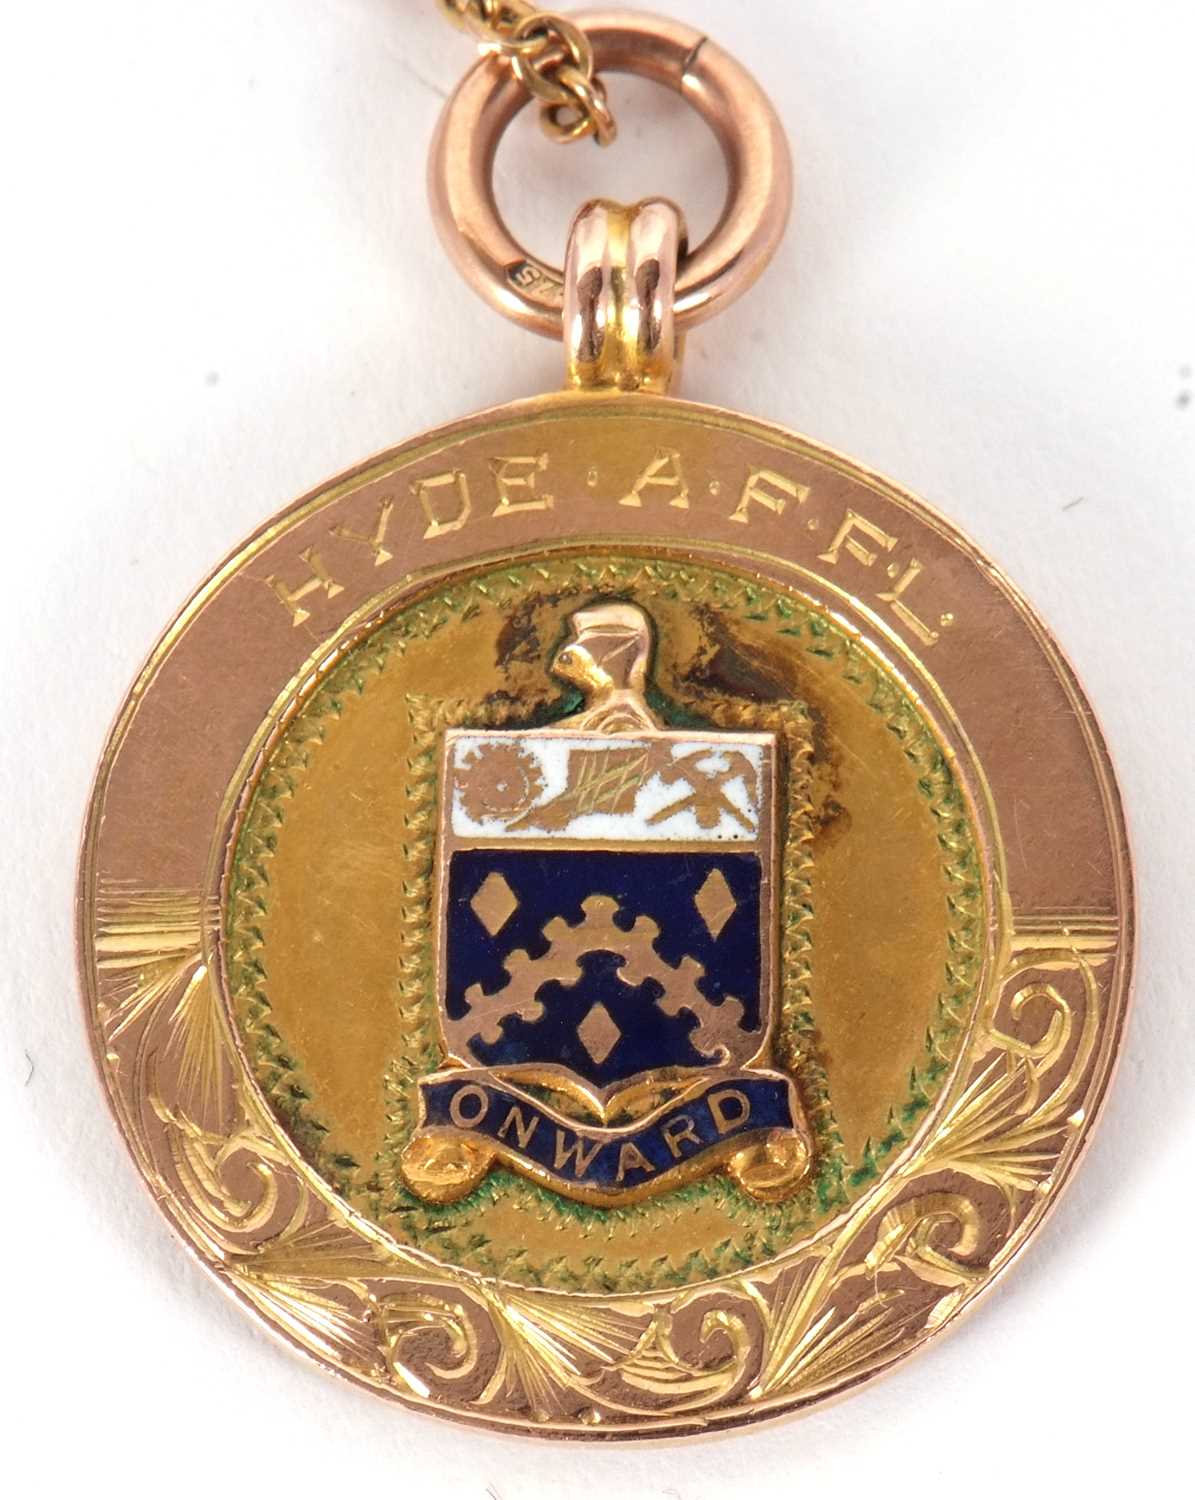 A 9ct 1929-30 Football medallion, the round medallion with enamelled coat of arms to one side and